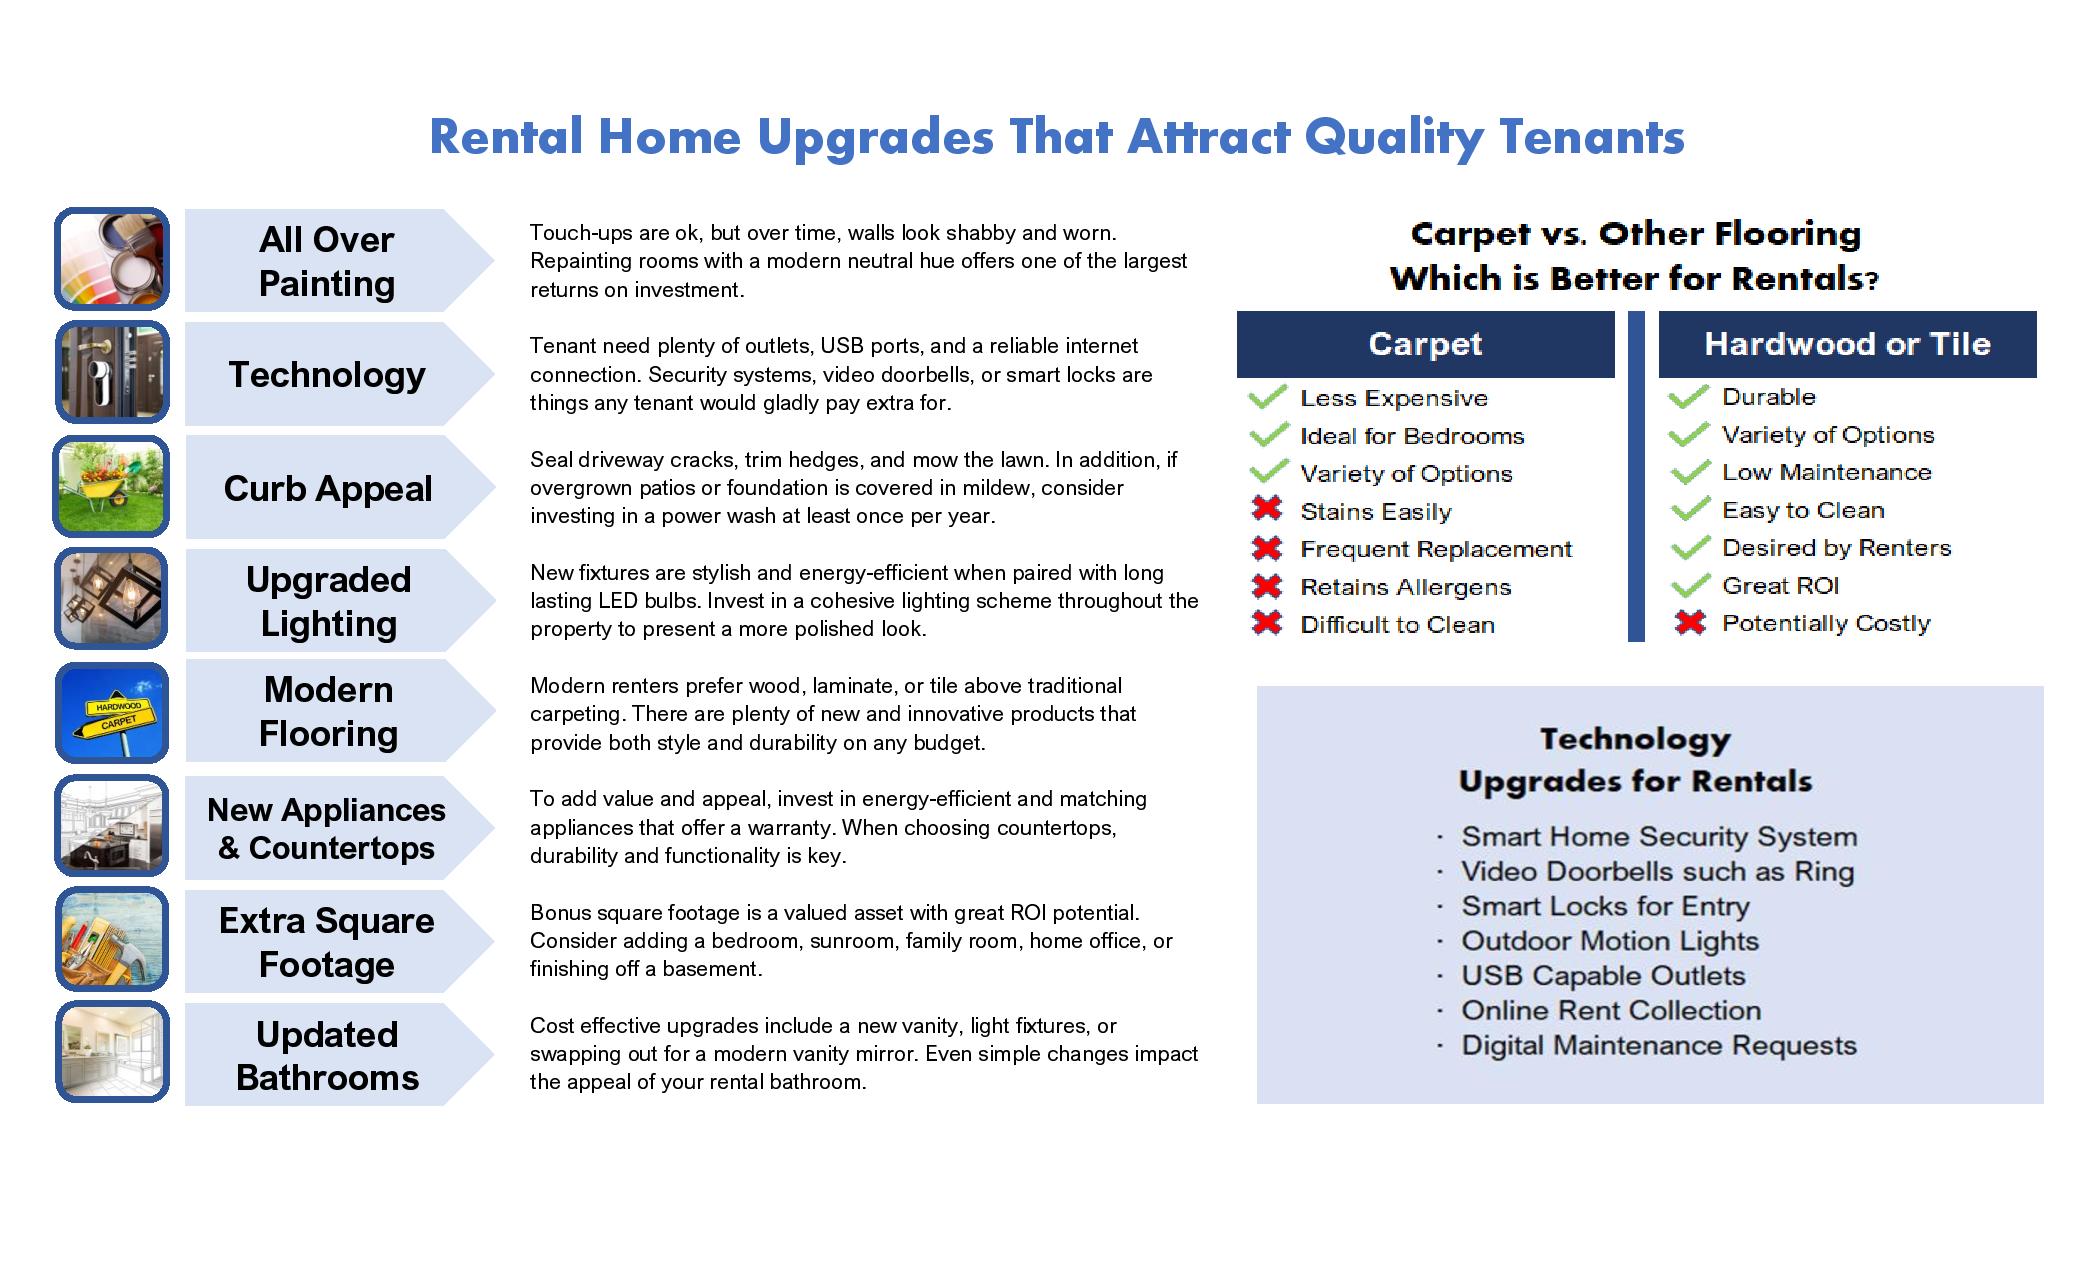 Rental Home Upgrades to Attract Quality Tenants